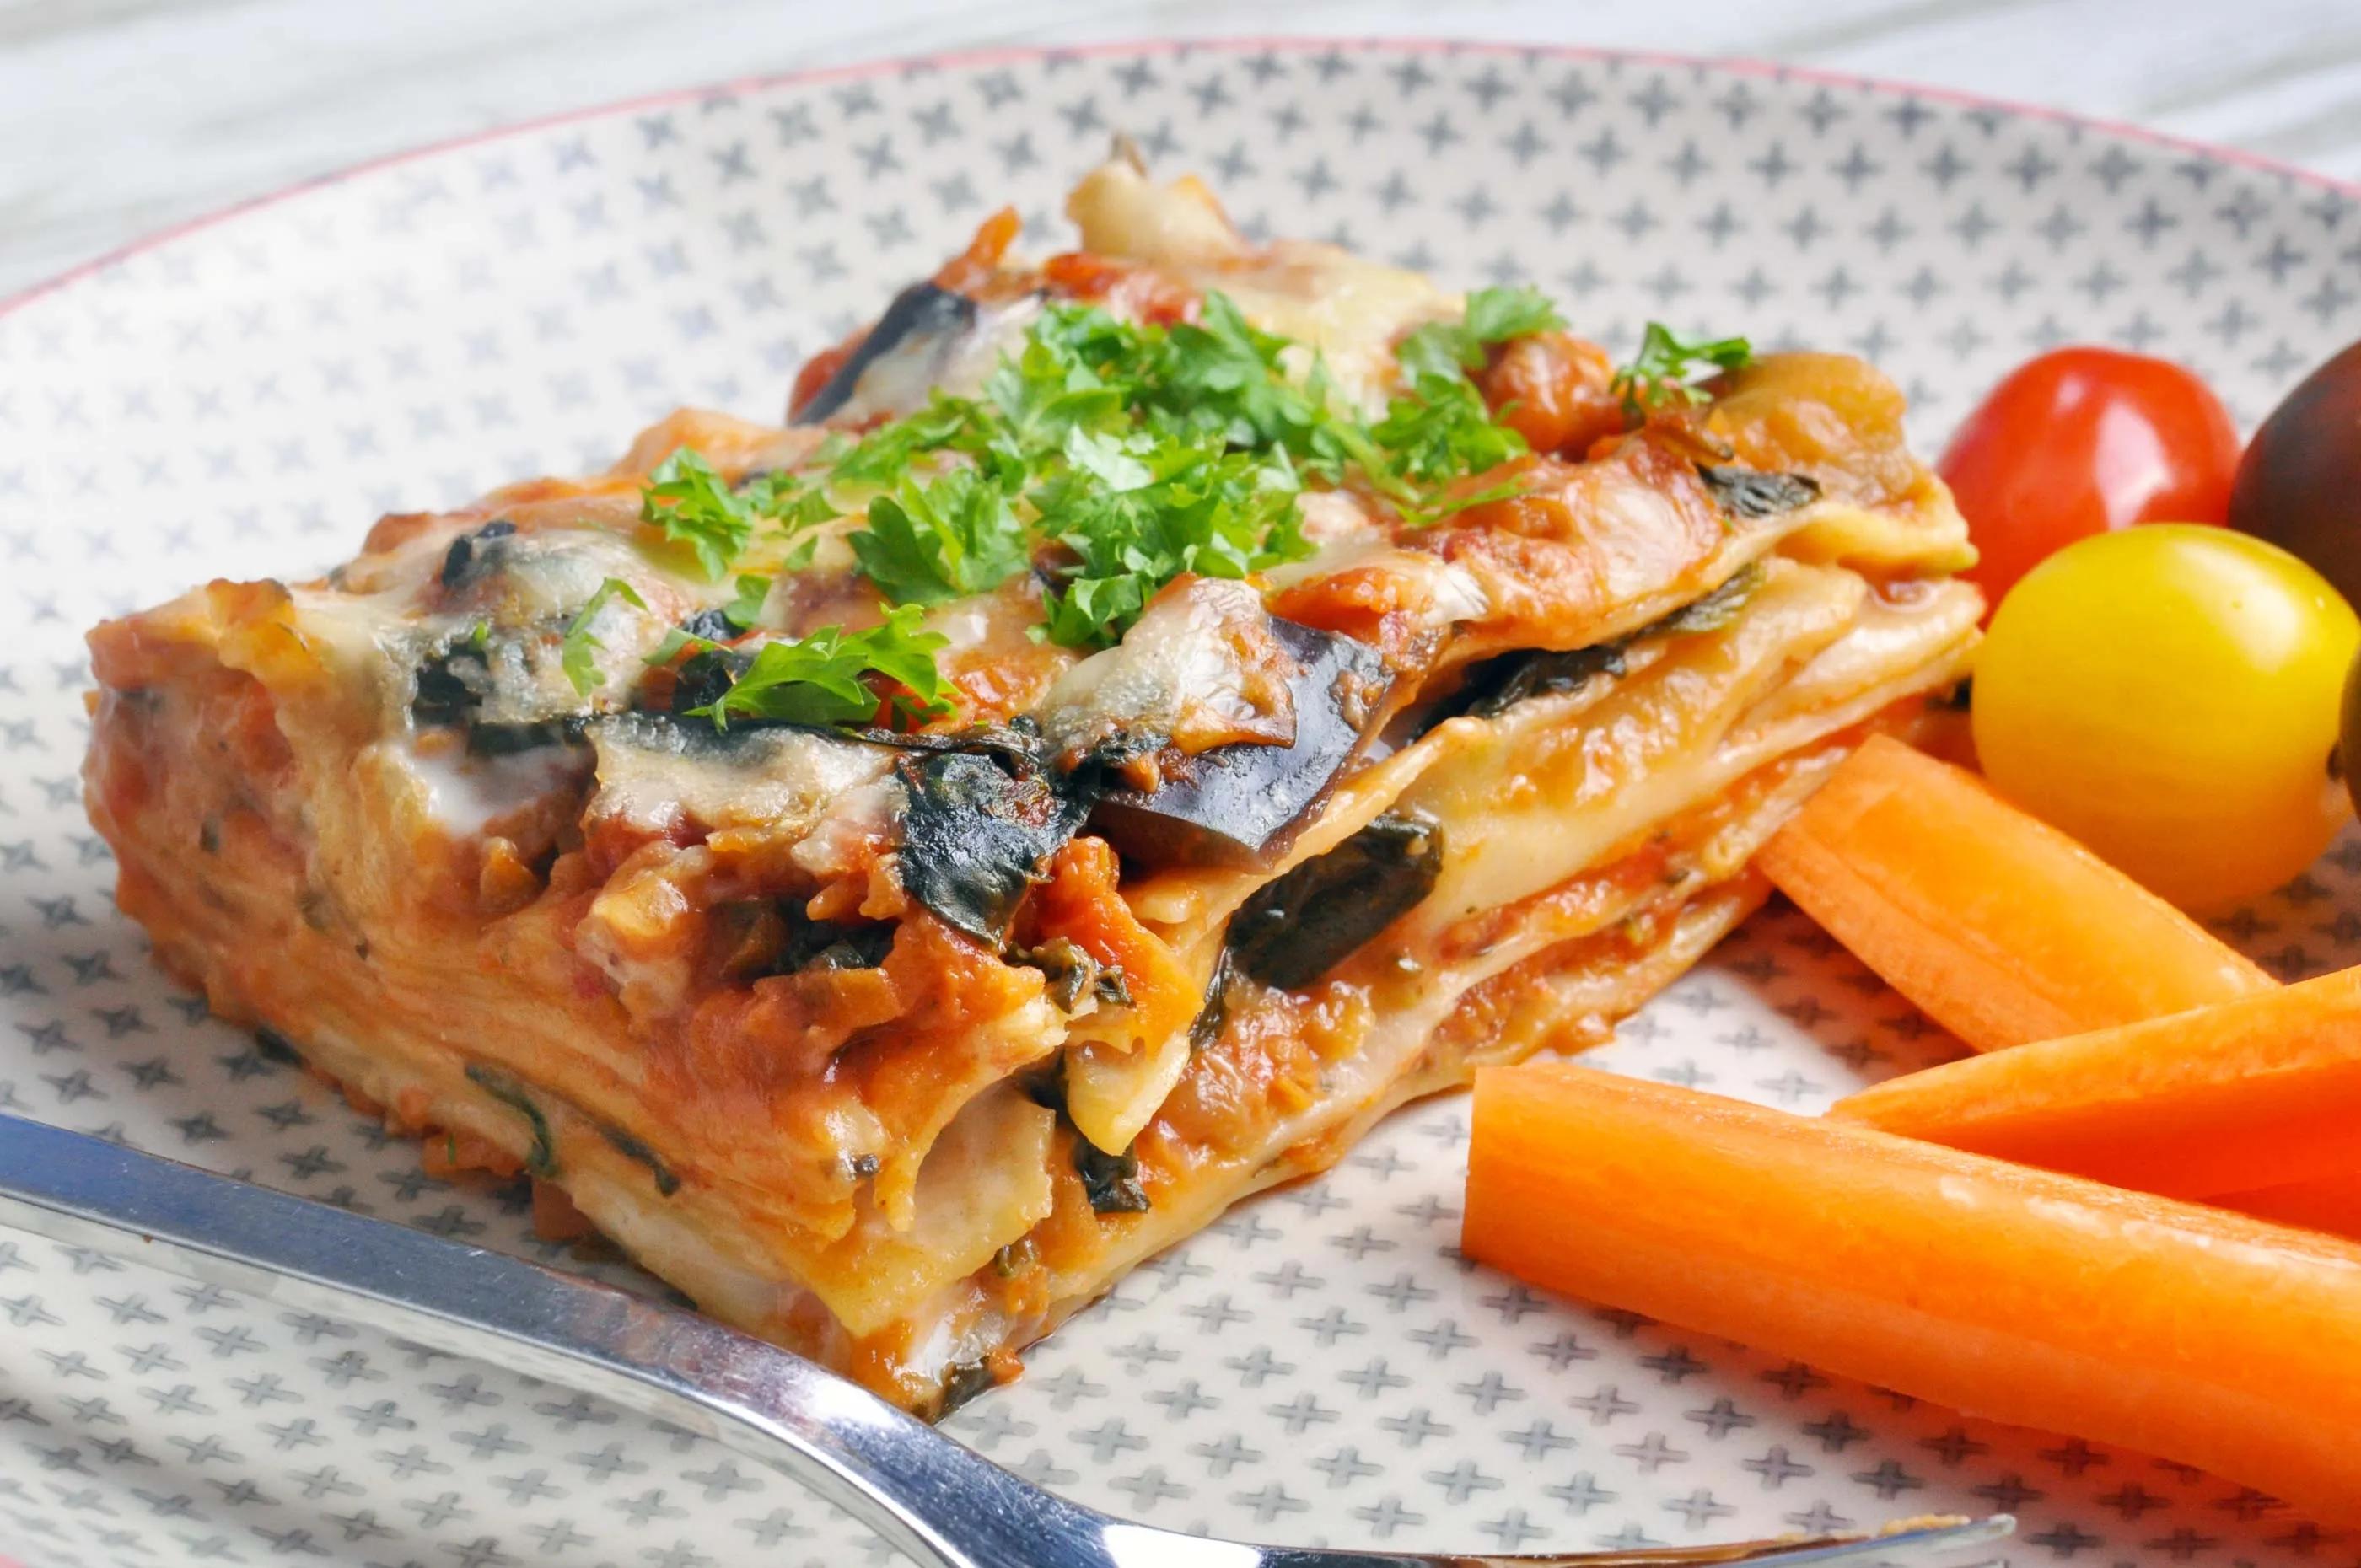 Veggie lasagne with spinach, aubergine and carrot - good for two days